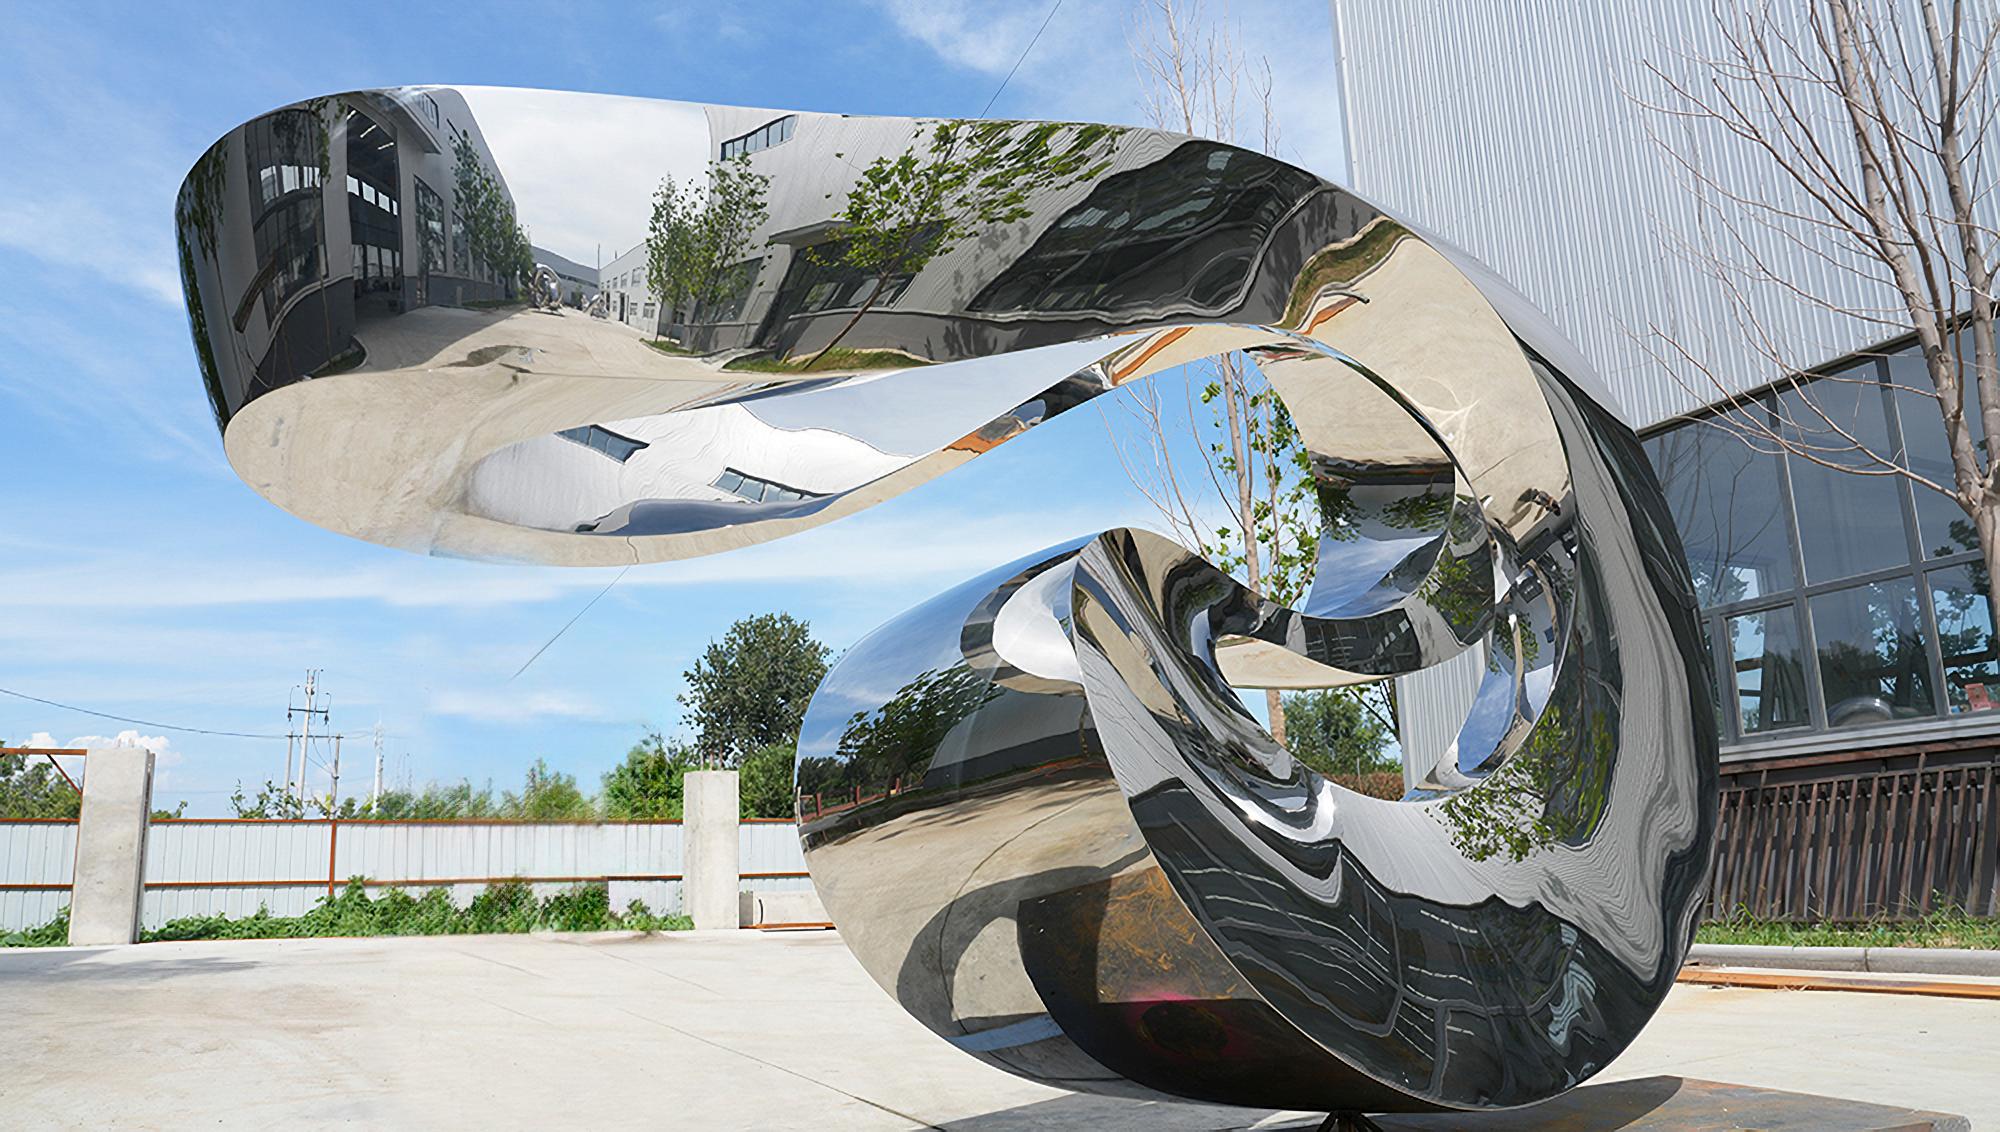 Zephyr 7ft SS - large, abstract, polished stainless steel outdoor sculpture - Gray Abstract Sculpture by Jeremy Guy